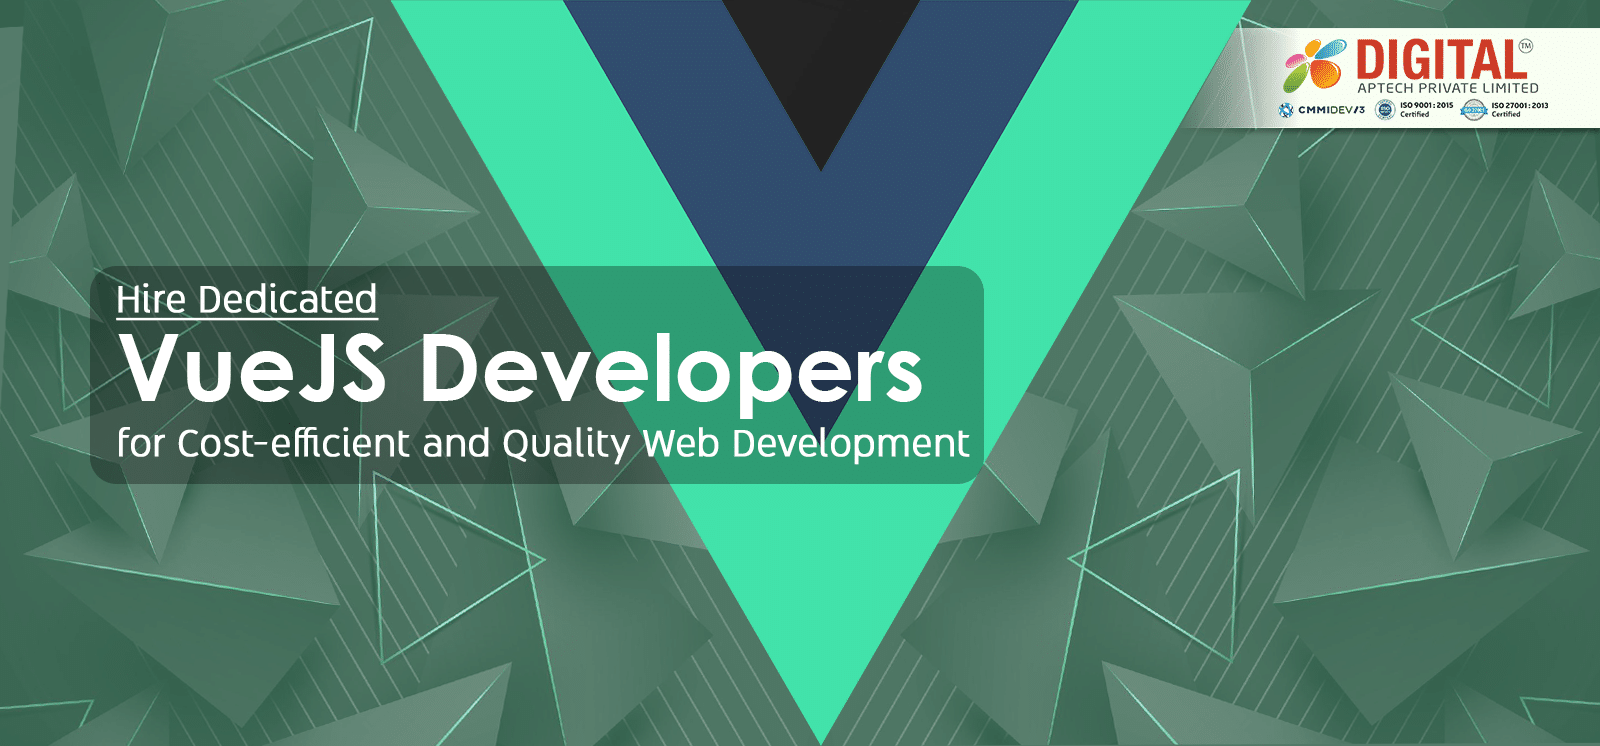 Hire Dedicated VueJS Developers for Cost-efficient and Quality Web Development